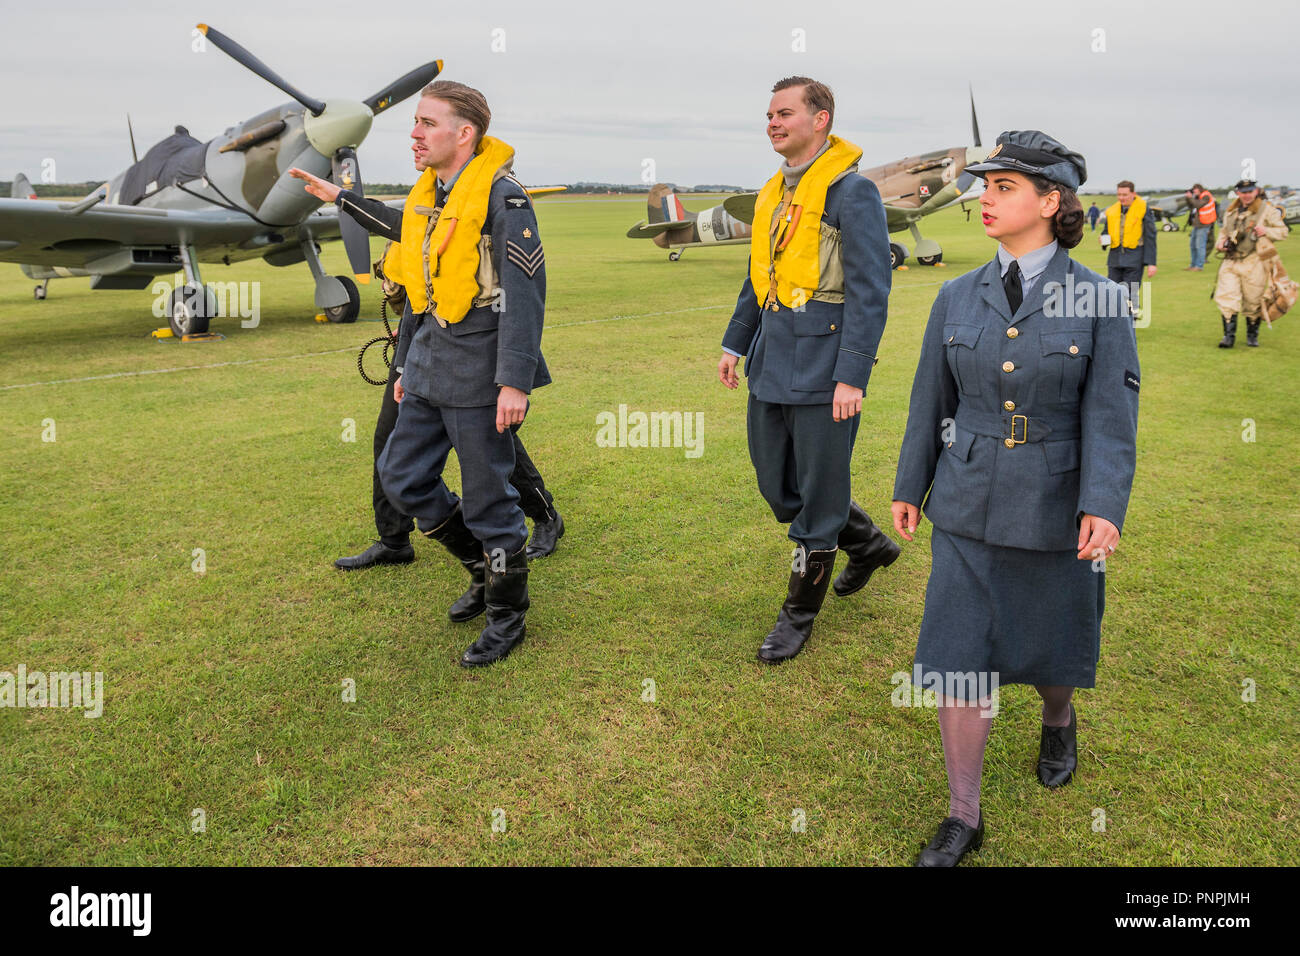 Duxford, UK. 22nd Sept 2018. Re-enactors in World War II uniforms on the  flight line with Spitfires and Hurricanes - The Duxford Battle of Britain  Air Show is a finale to the